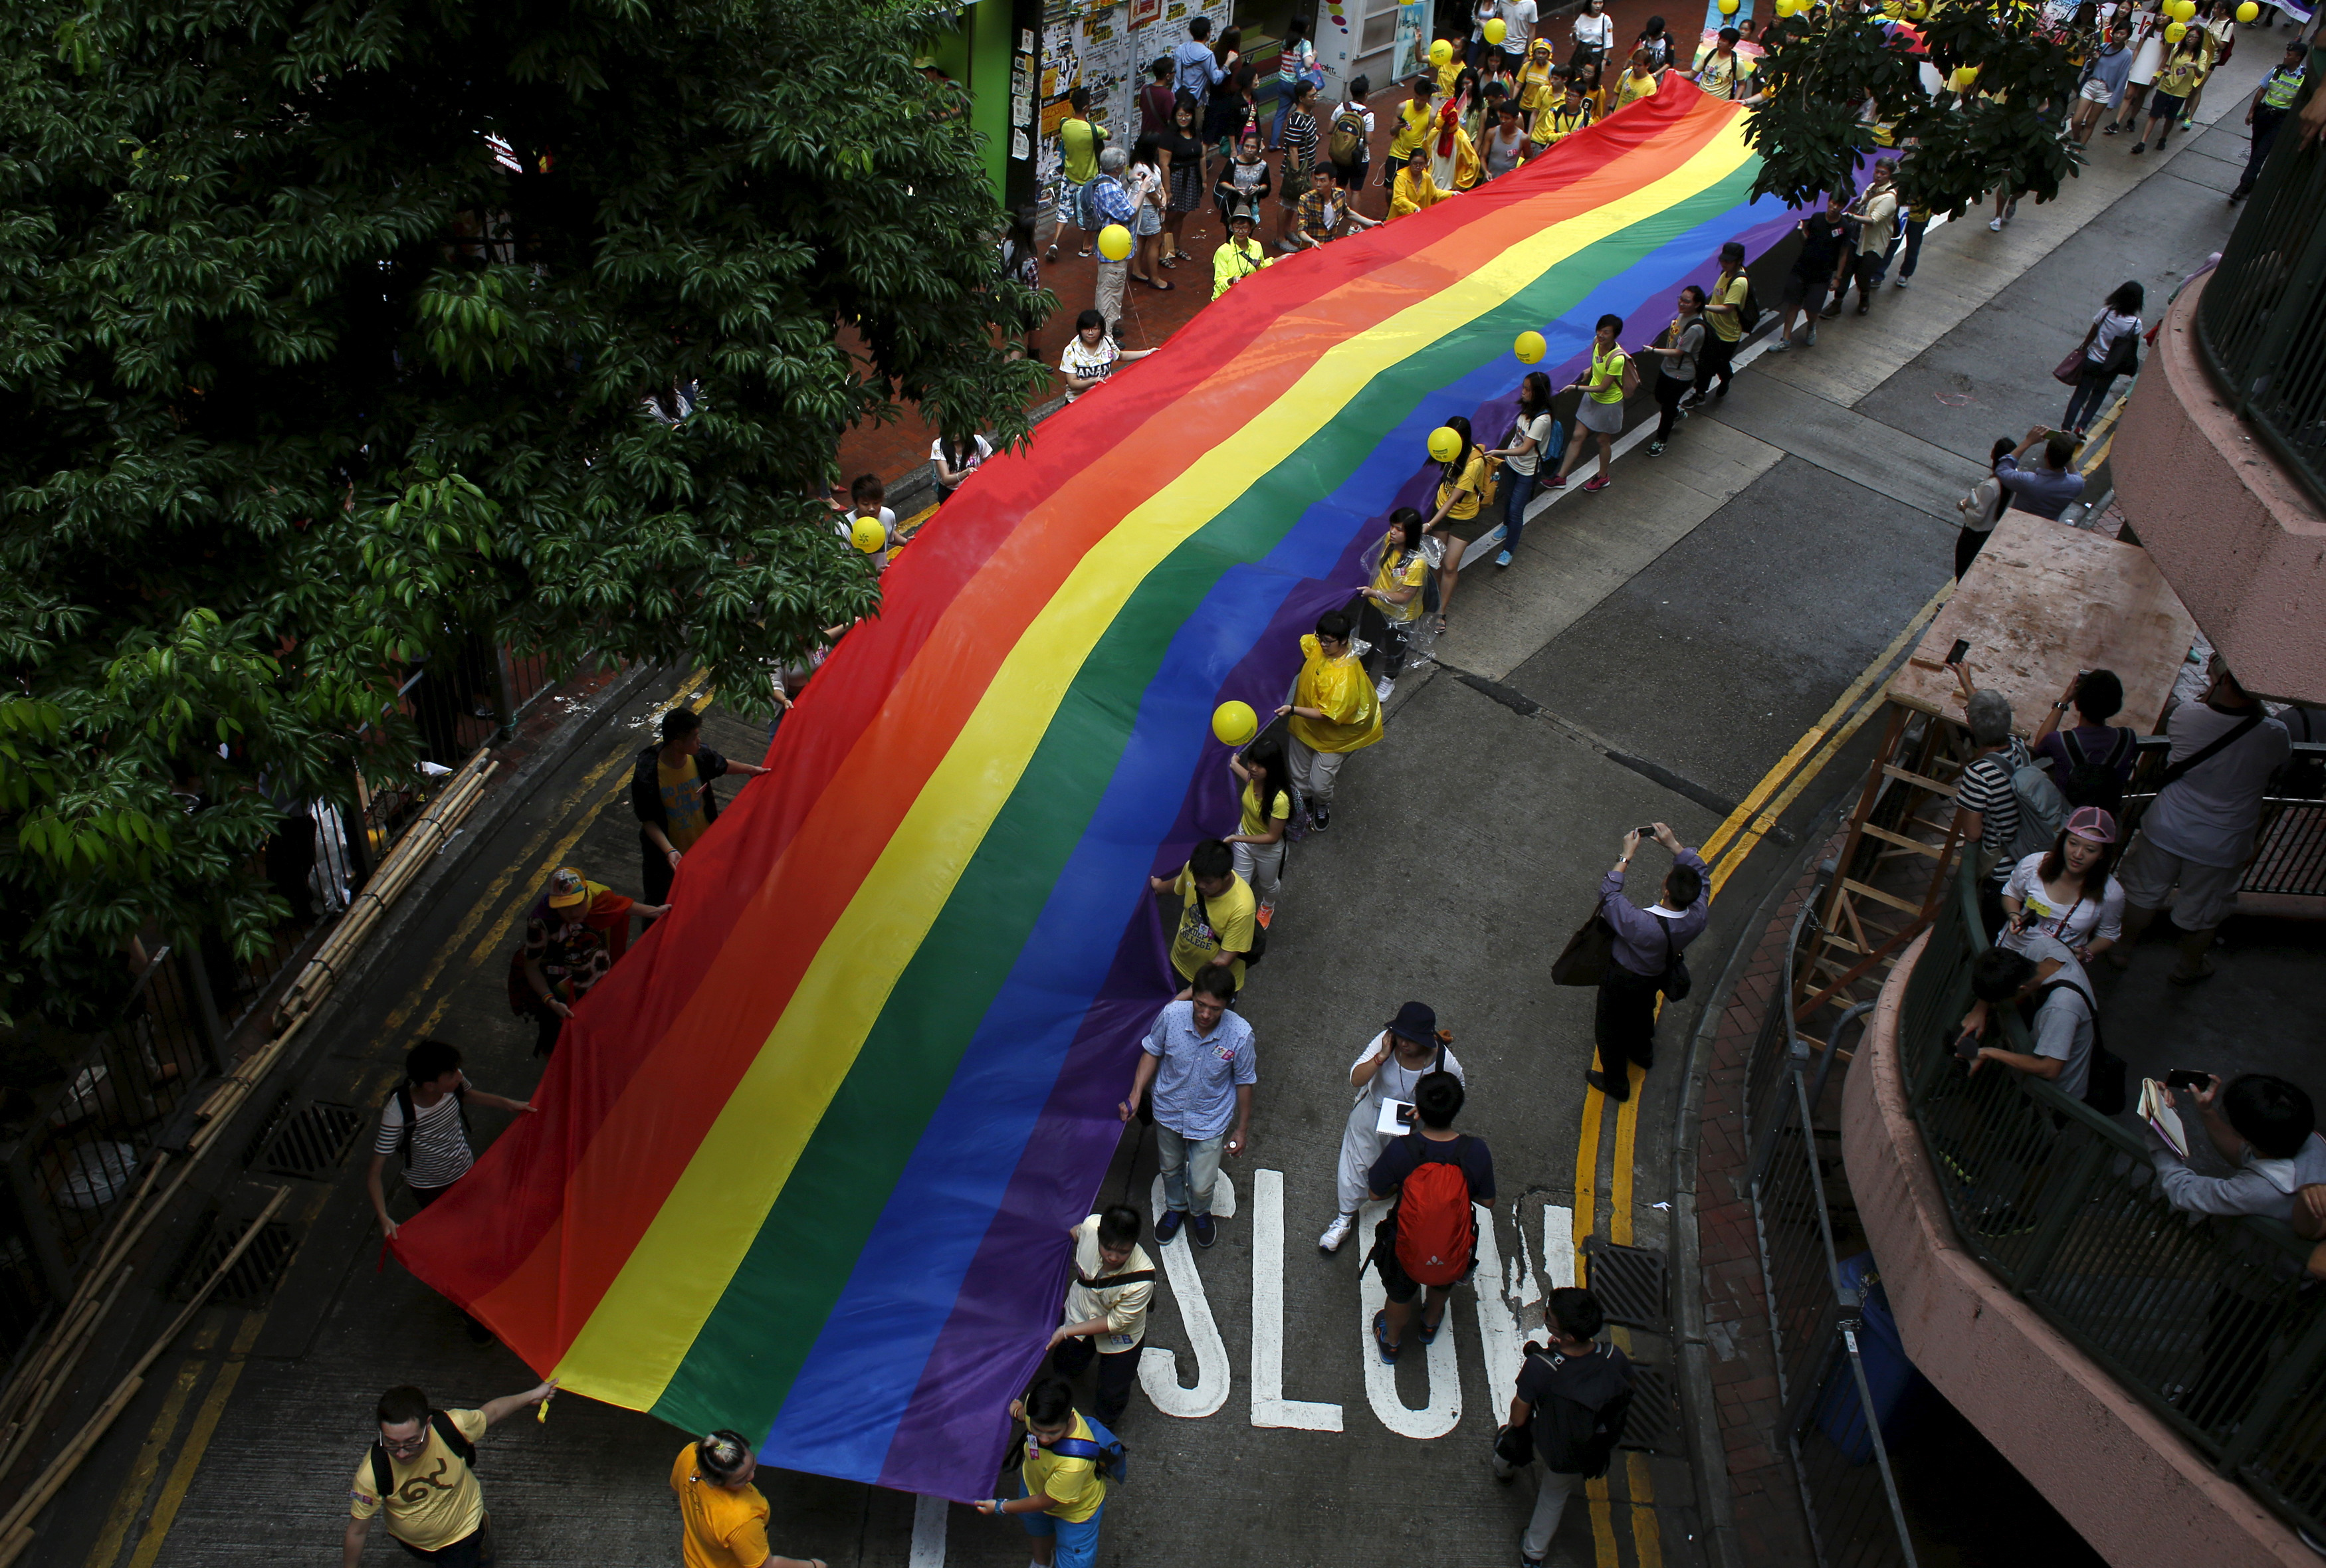 More LGBTQ rights could help Asia financial hubs draw global talent Reuters